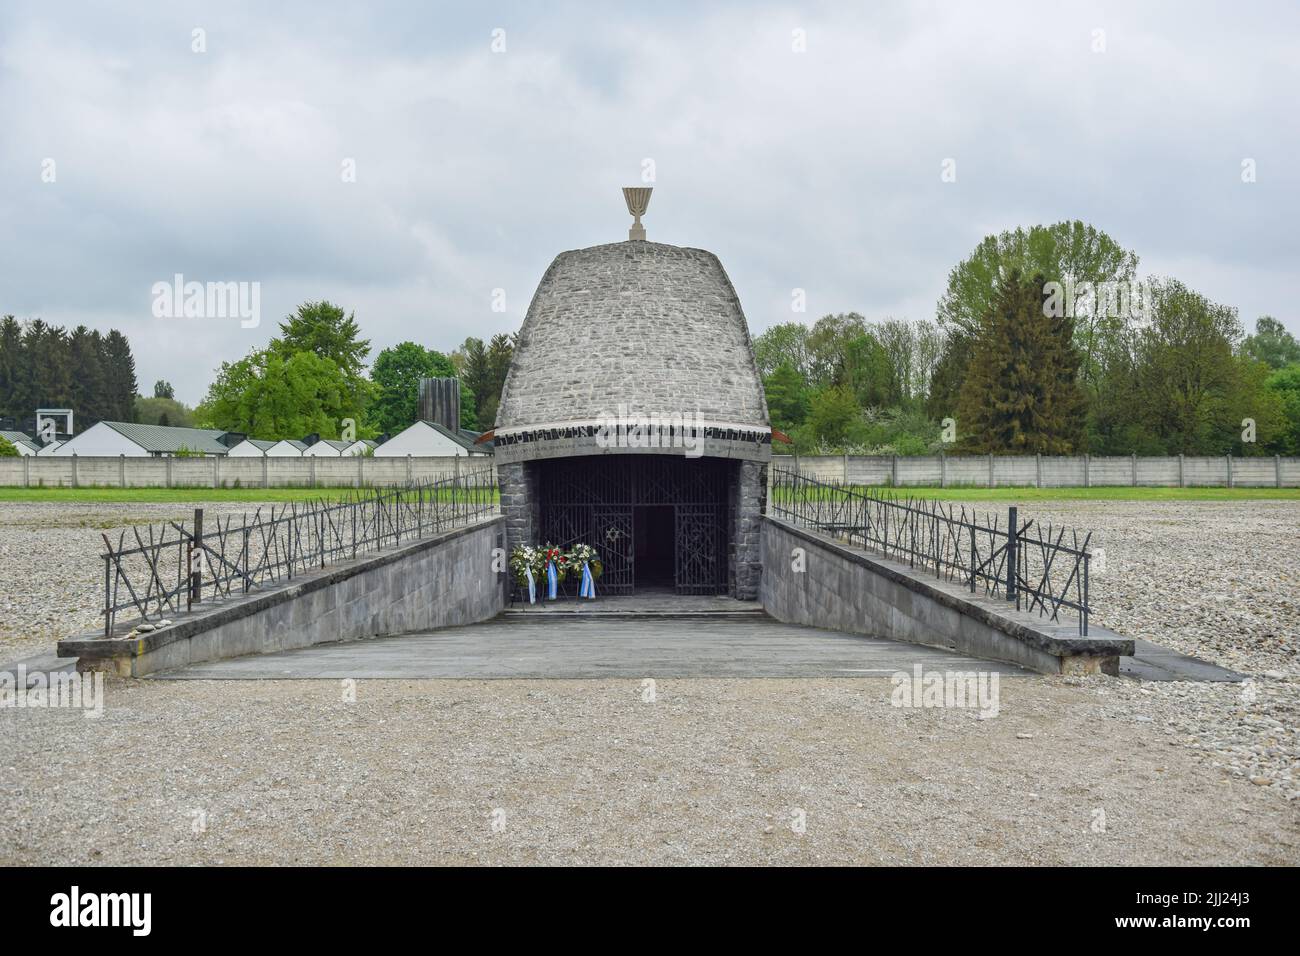 Dachau concentration camp in Germany Stock Photo